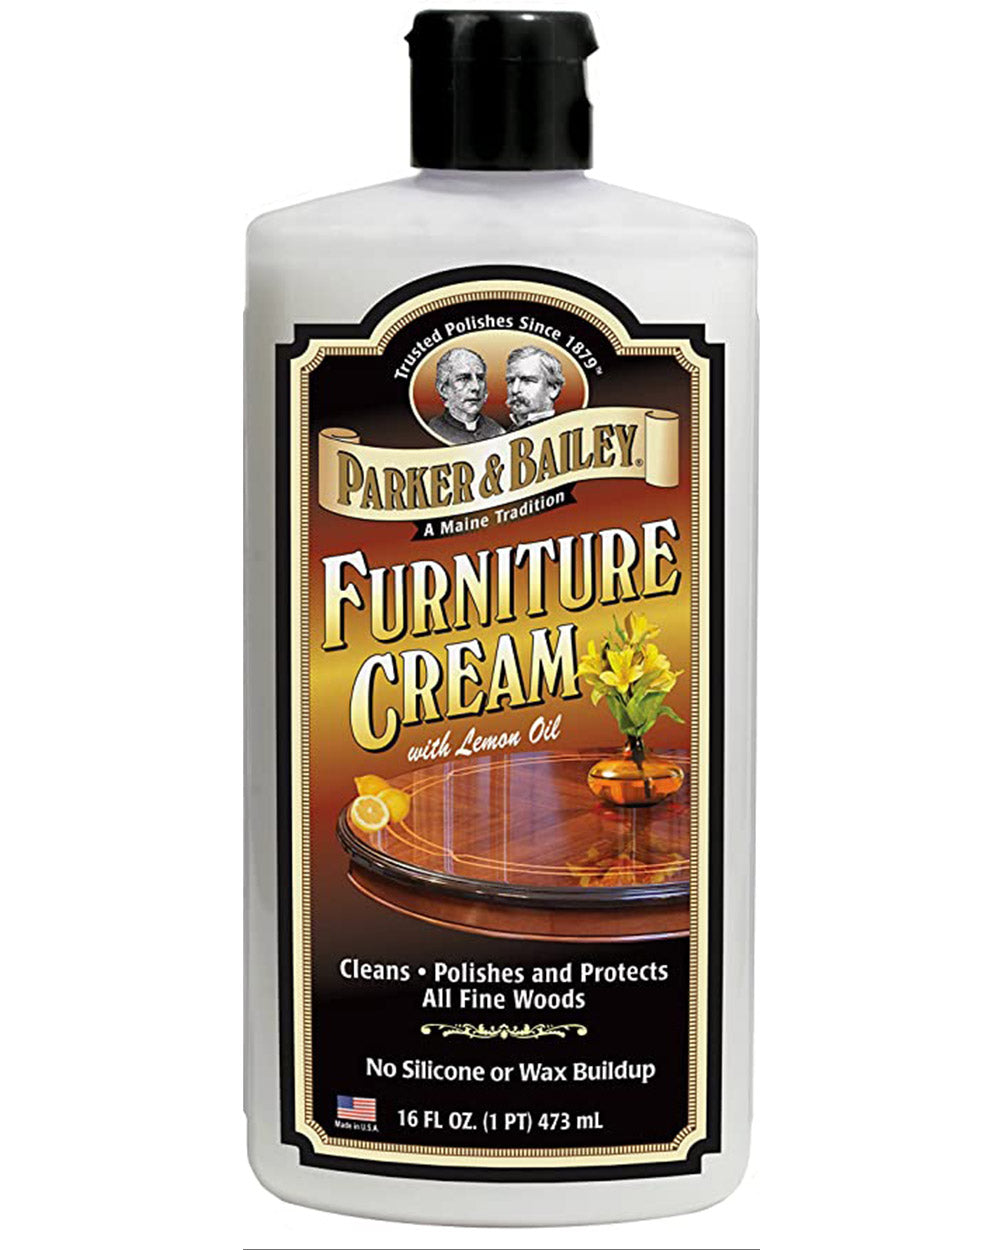 This Furniture Cream is a rich concentrated formula that does not contain dulling waxes, harmful silicones, or flammable solvents.   This formula has been used by the finest furniture restorers and antique experts. This Original safe furniture cream has been used for many years, with only the best results.   Great for antique furniture, woodwork, mantles, doors, panelling, pianos, and much more. Rejuvenating all wood surfaces, leaving a long lasting natural appearance. 